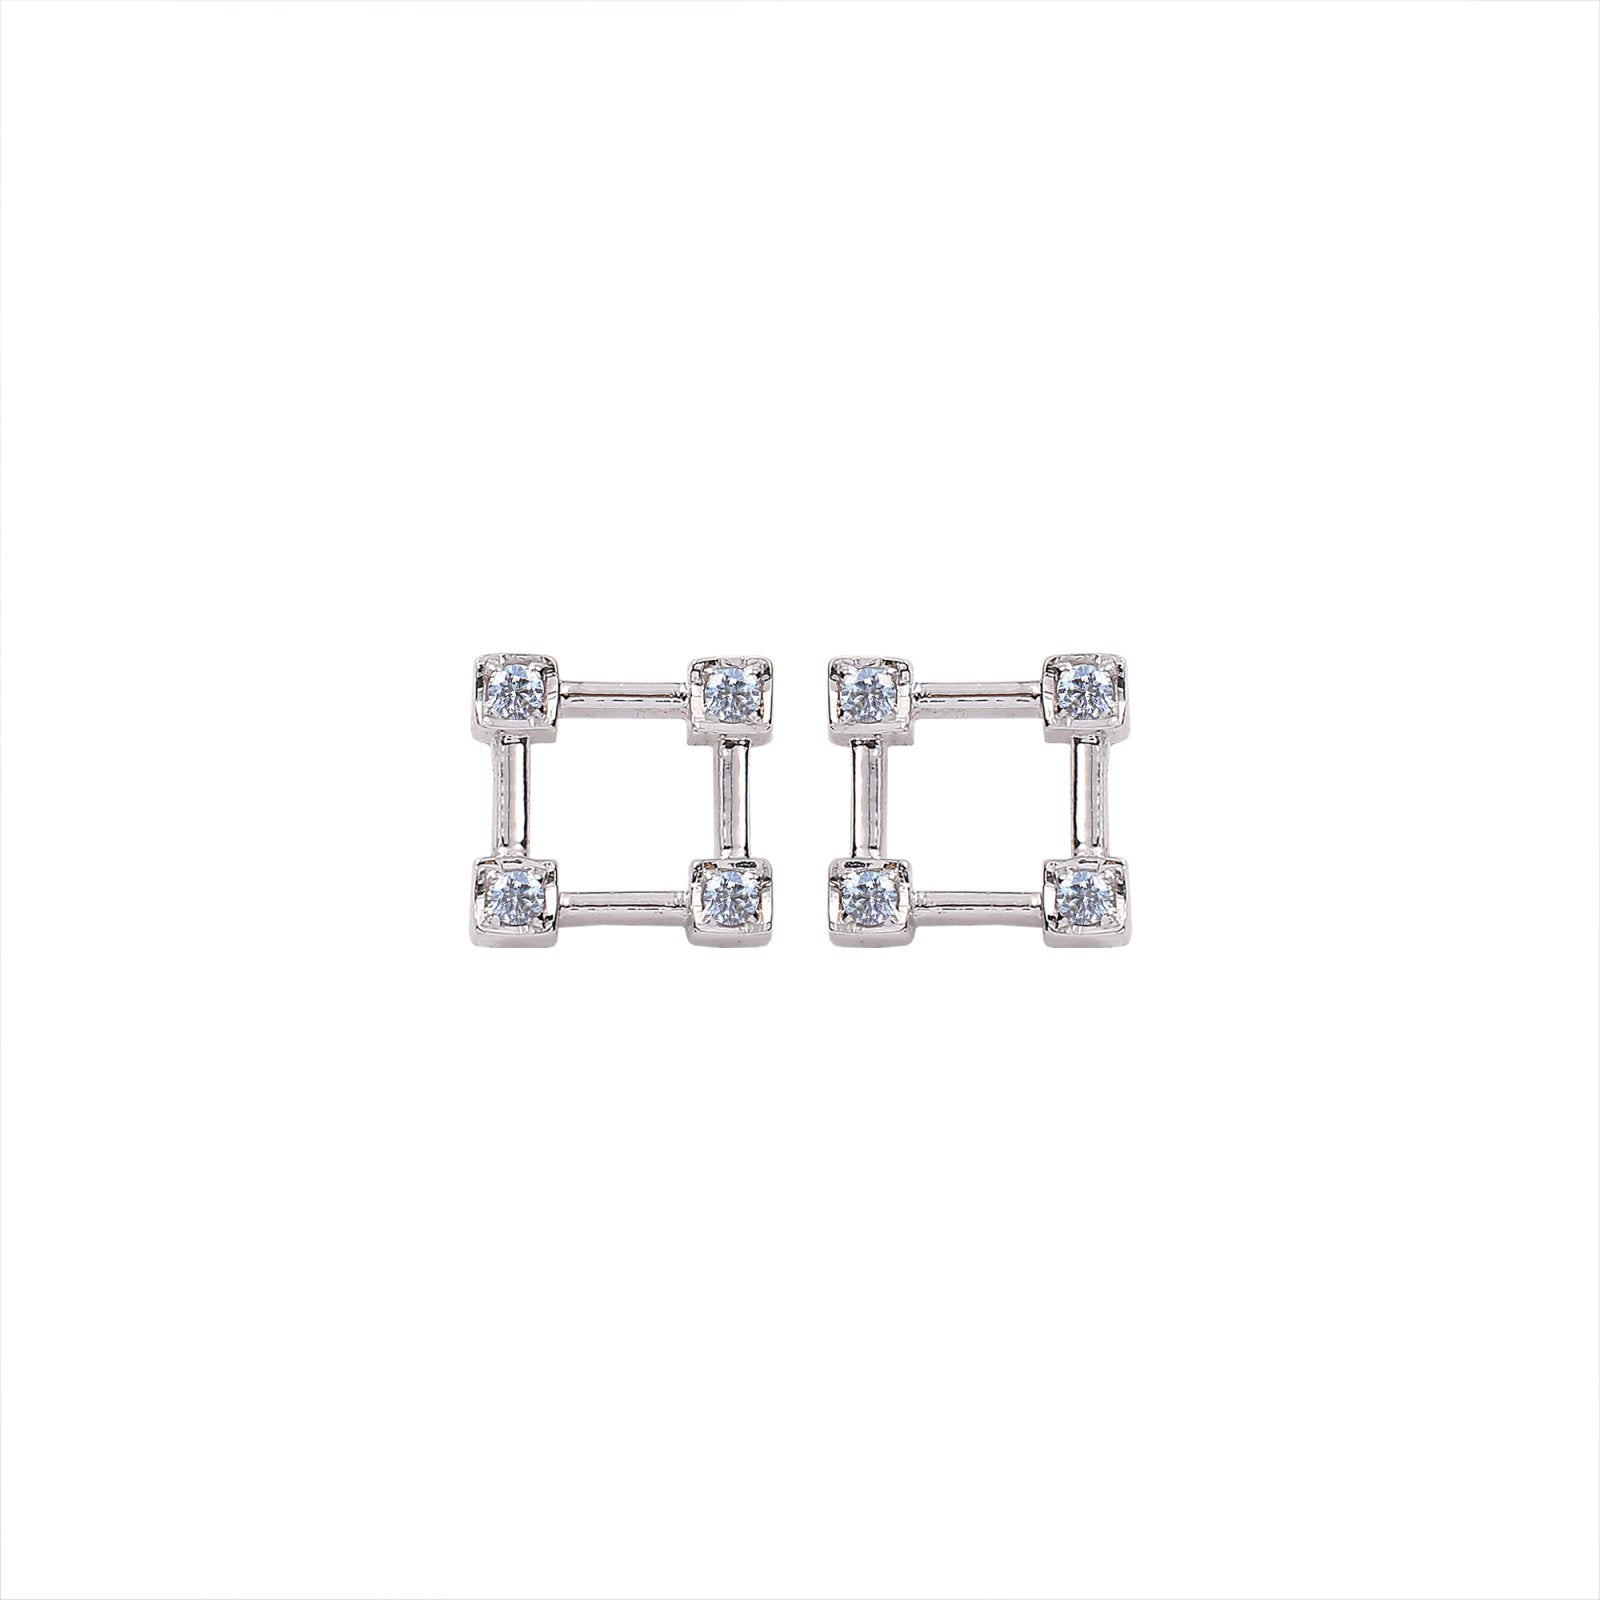 White Gold Square Shape Earrings setting with Four Diamonds on the corners 14k TDW:0.18ct VS GH